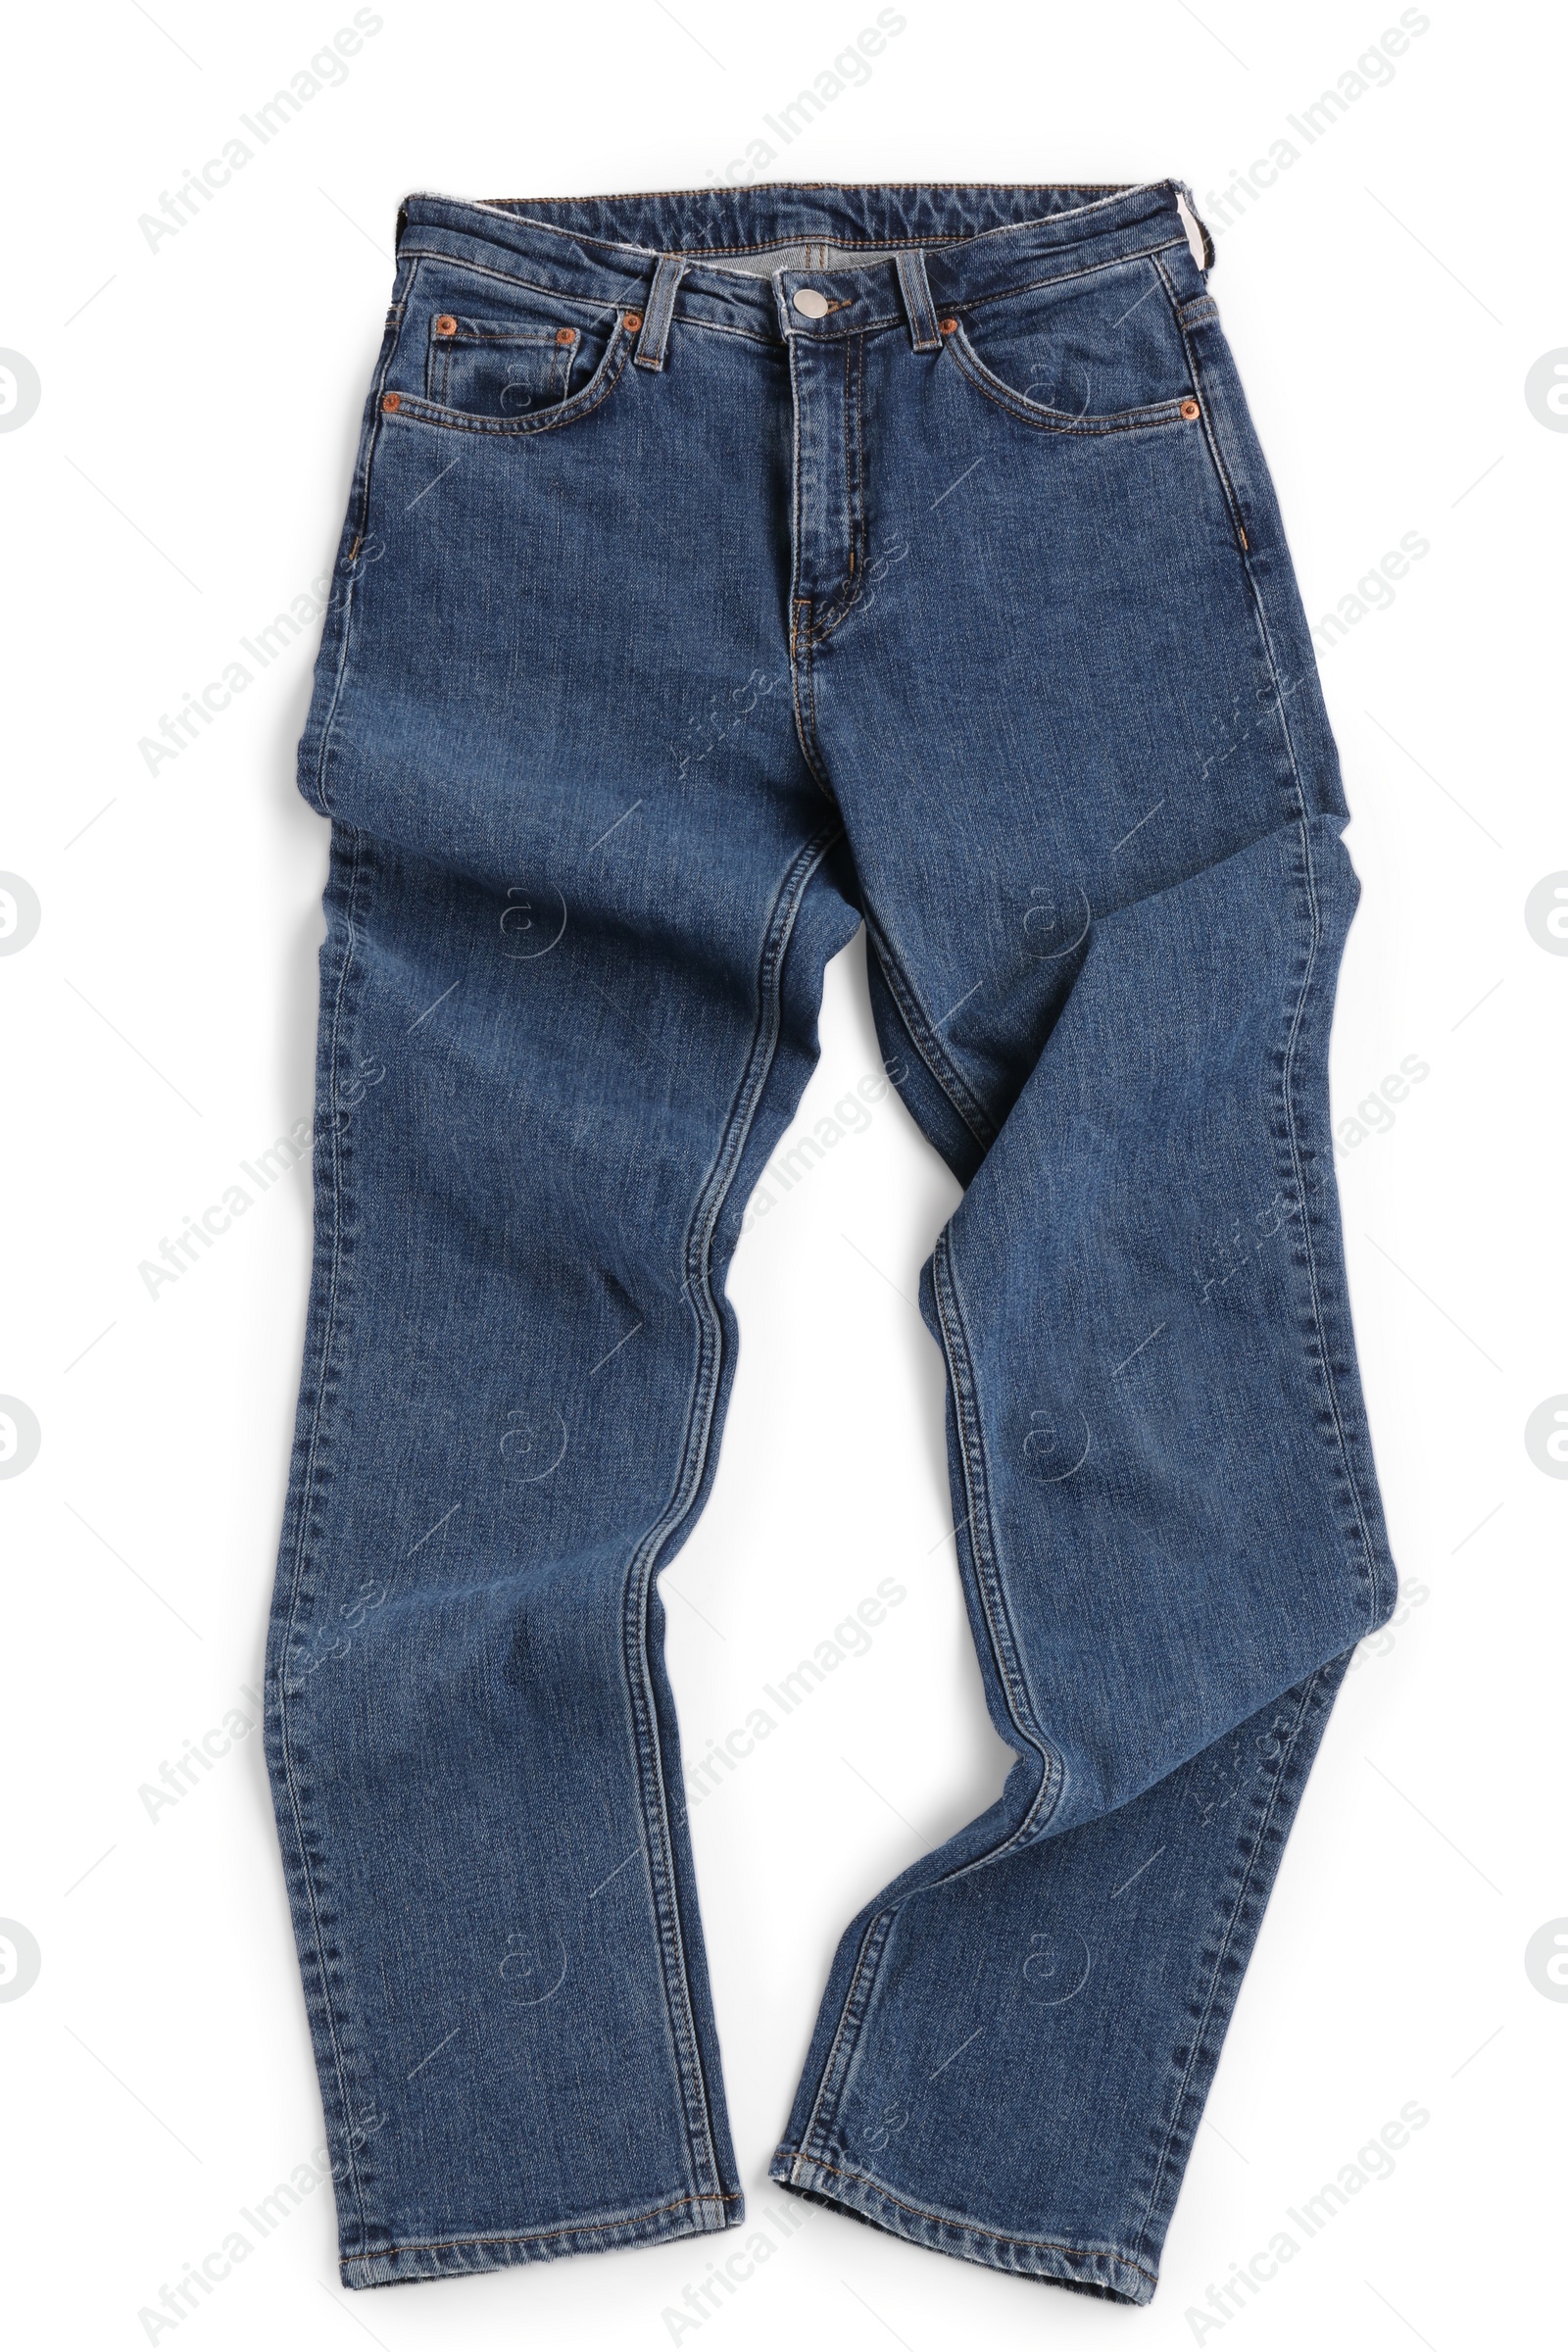 Photo of Rumpled dark blue jeans isolated on white, top view. Stylish clothes